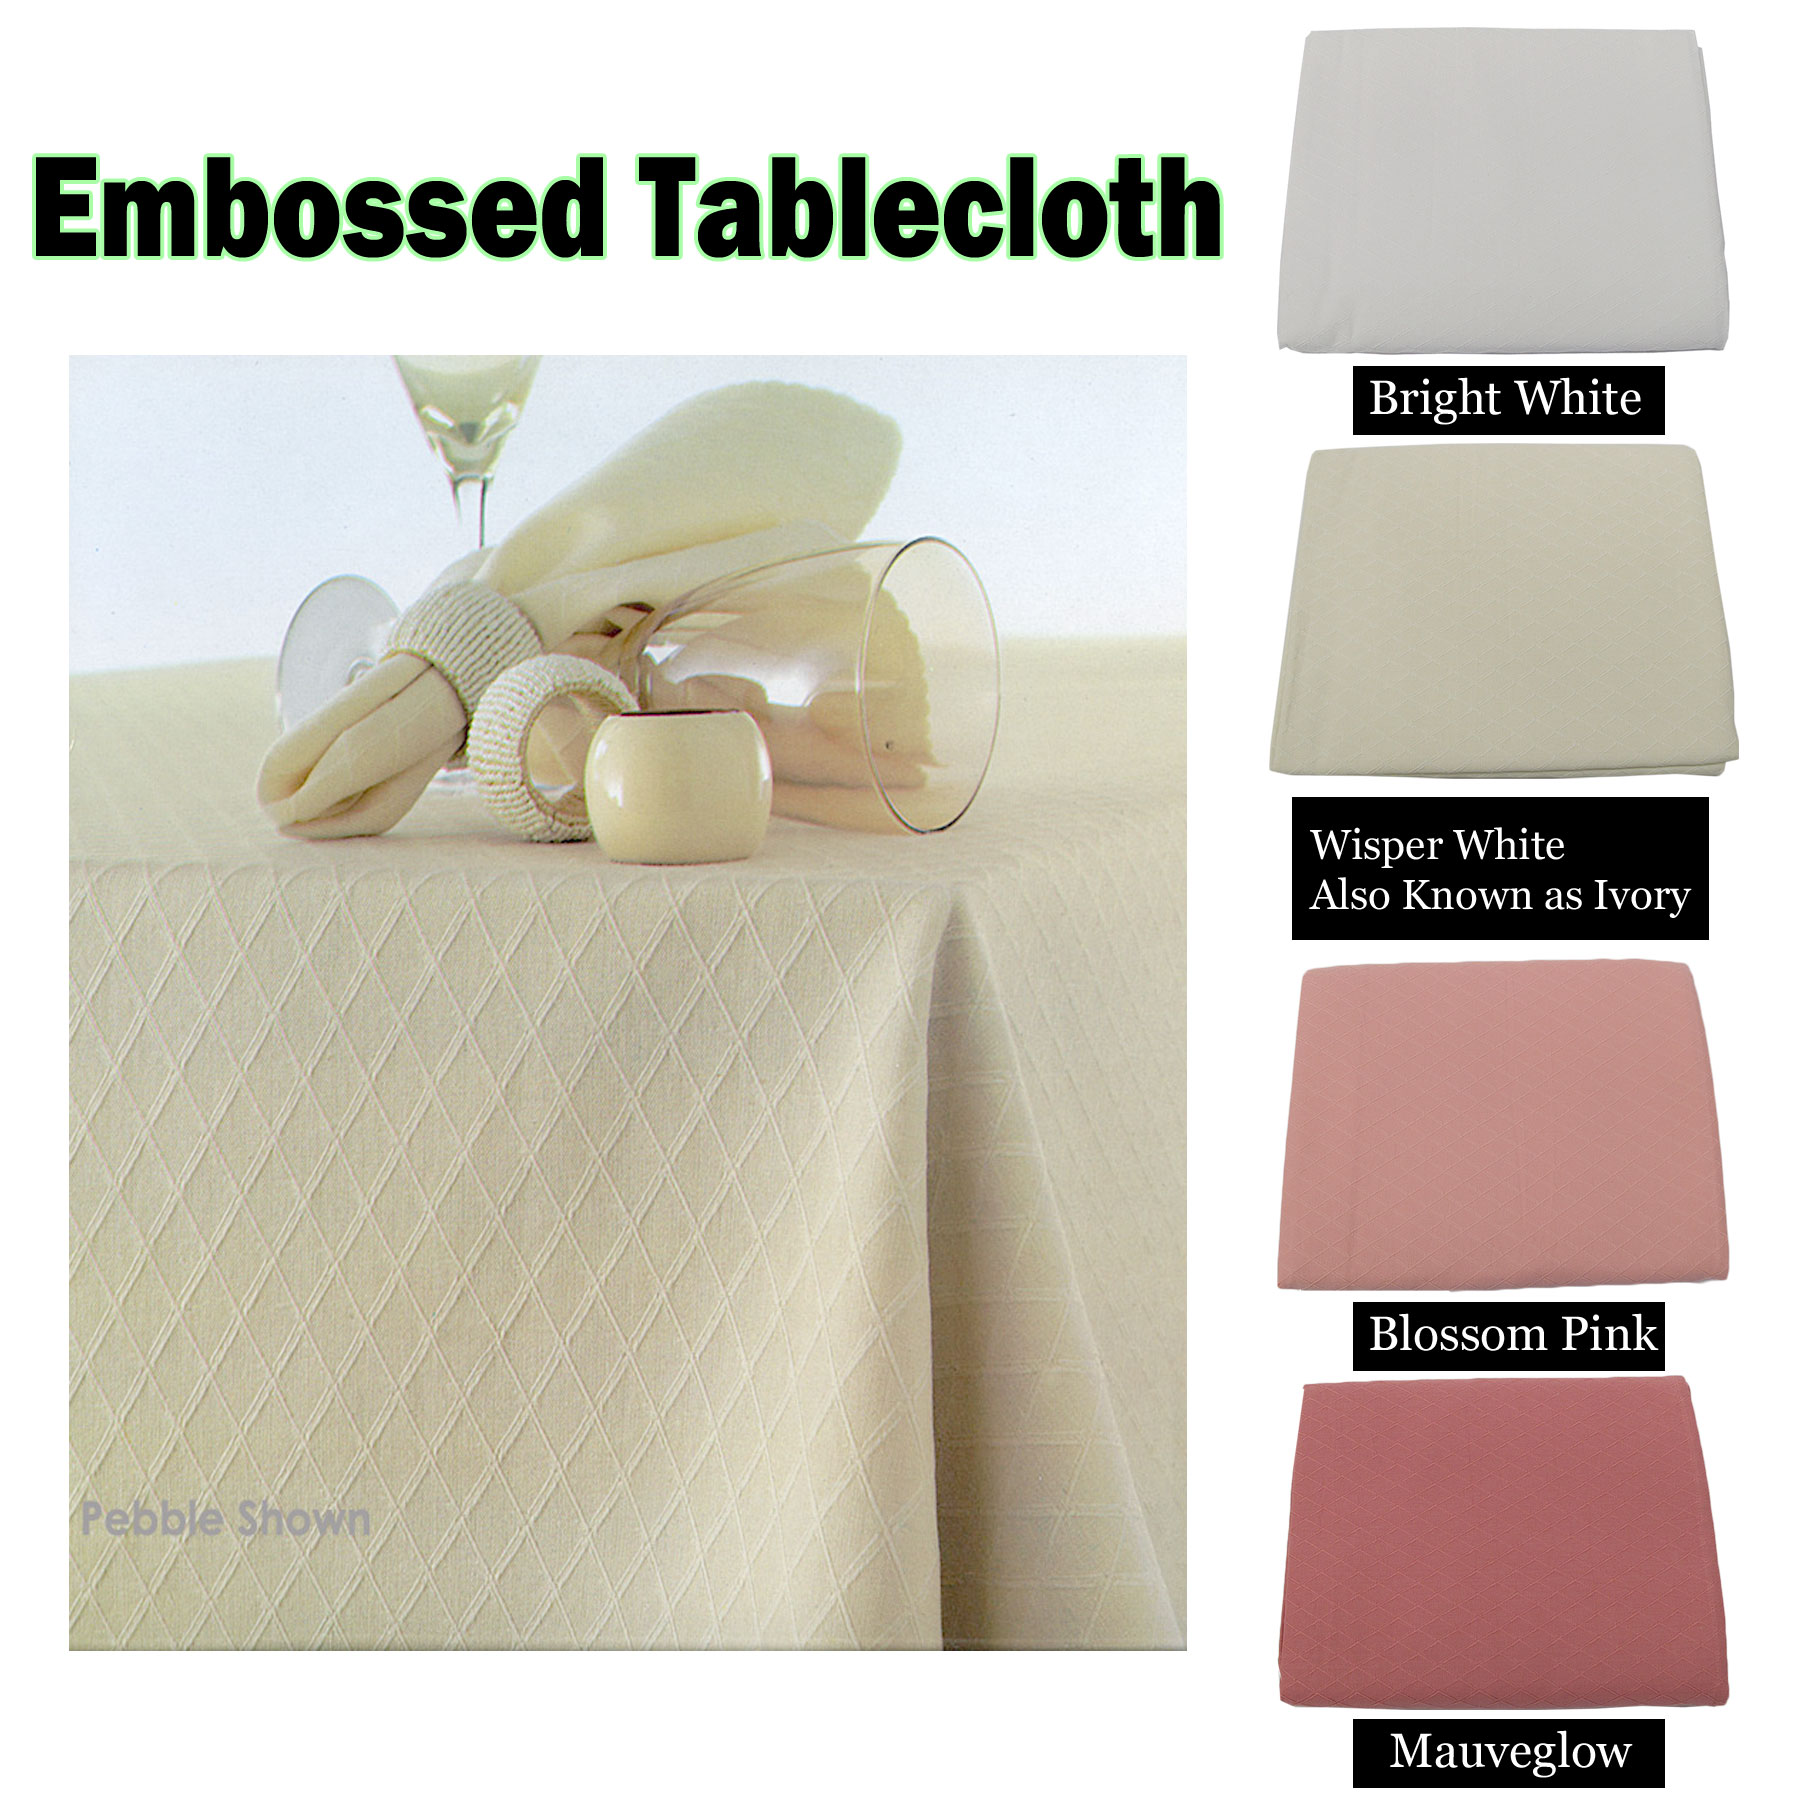 EMBOSSED Tablecloth Cotton Table Cloth - WHITE WHISPER BLOSSOM MAUVE